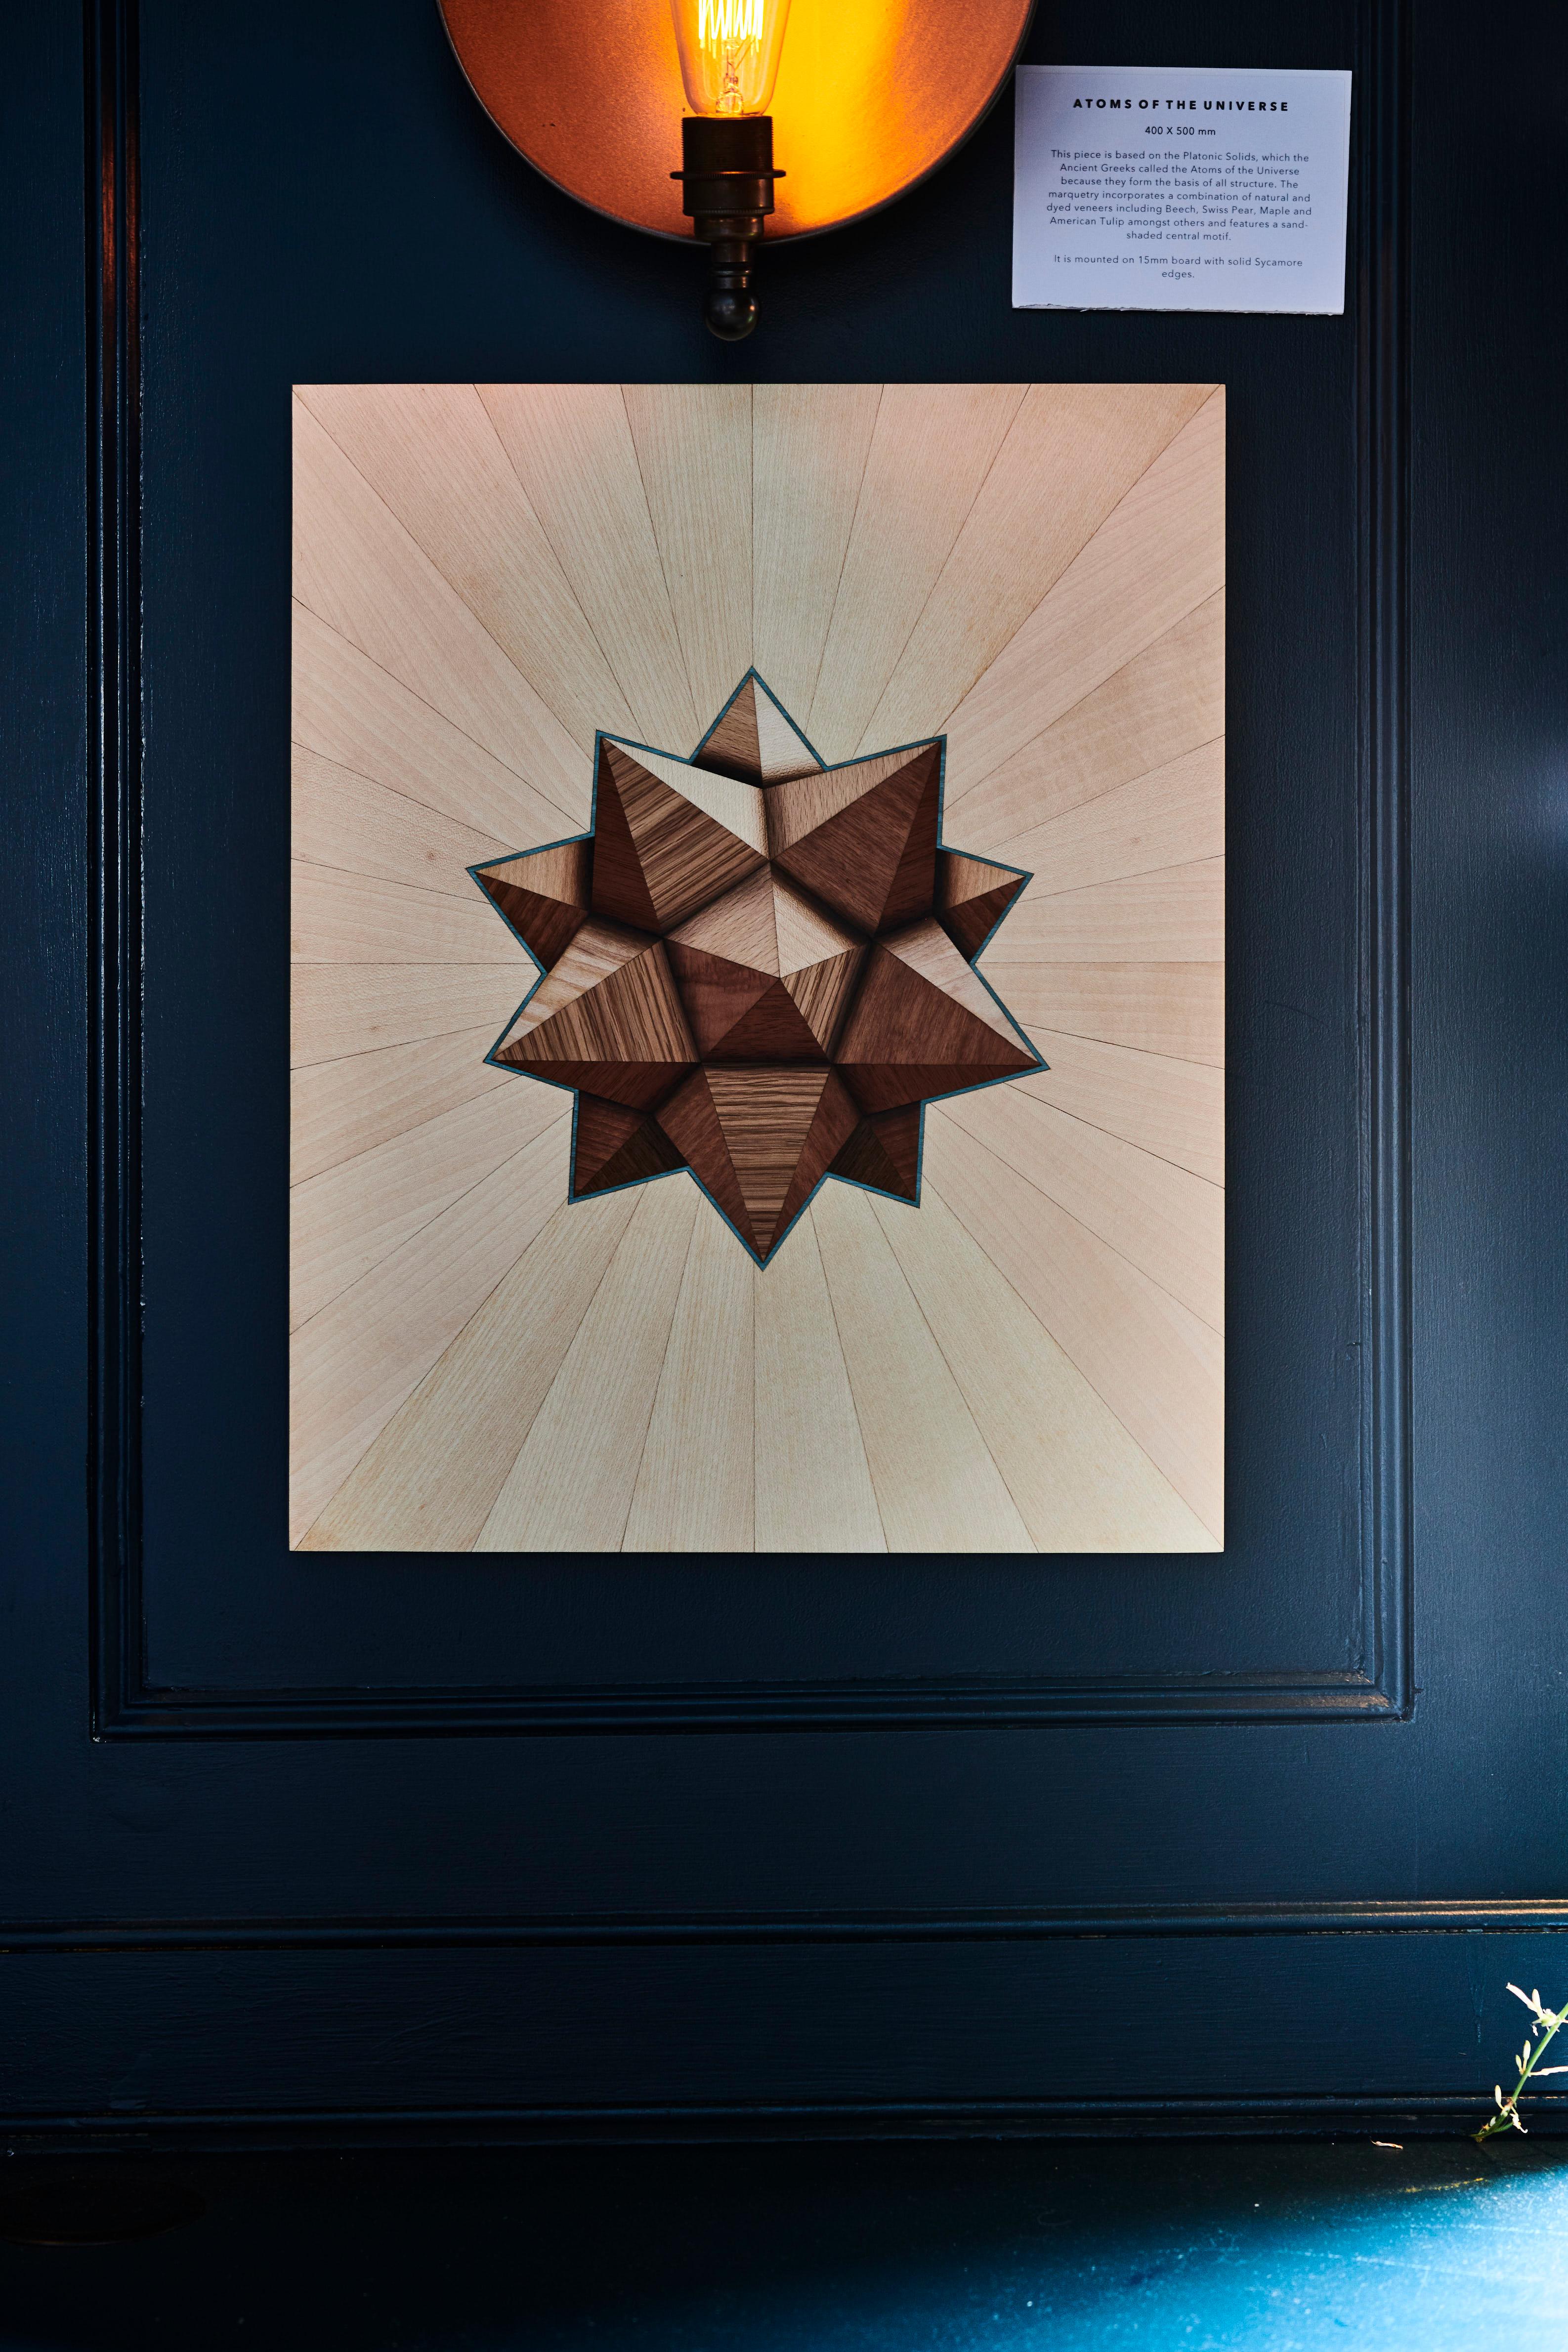 This recent artwork from the w o o d p o p studio is an example of the type of modern marquetry that w o o d p o p is becoming synonymous with. Since its inception 10 years ago - the studio has specialised in marquetry and inlay work; meticulous